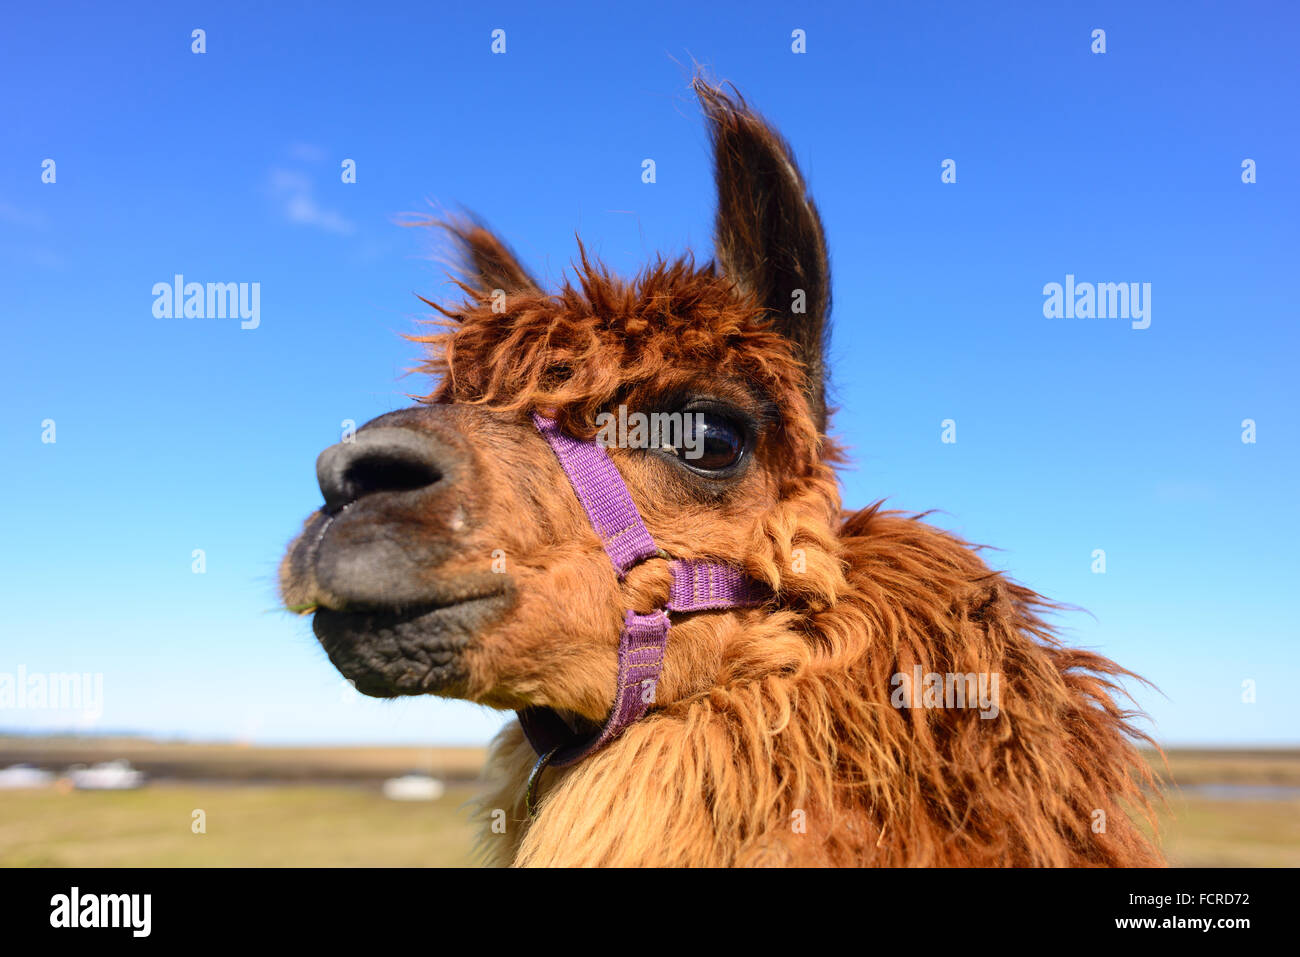 An alert Alpaca with orange fur and a purple harness in front of a blue sky. Stock Photo